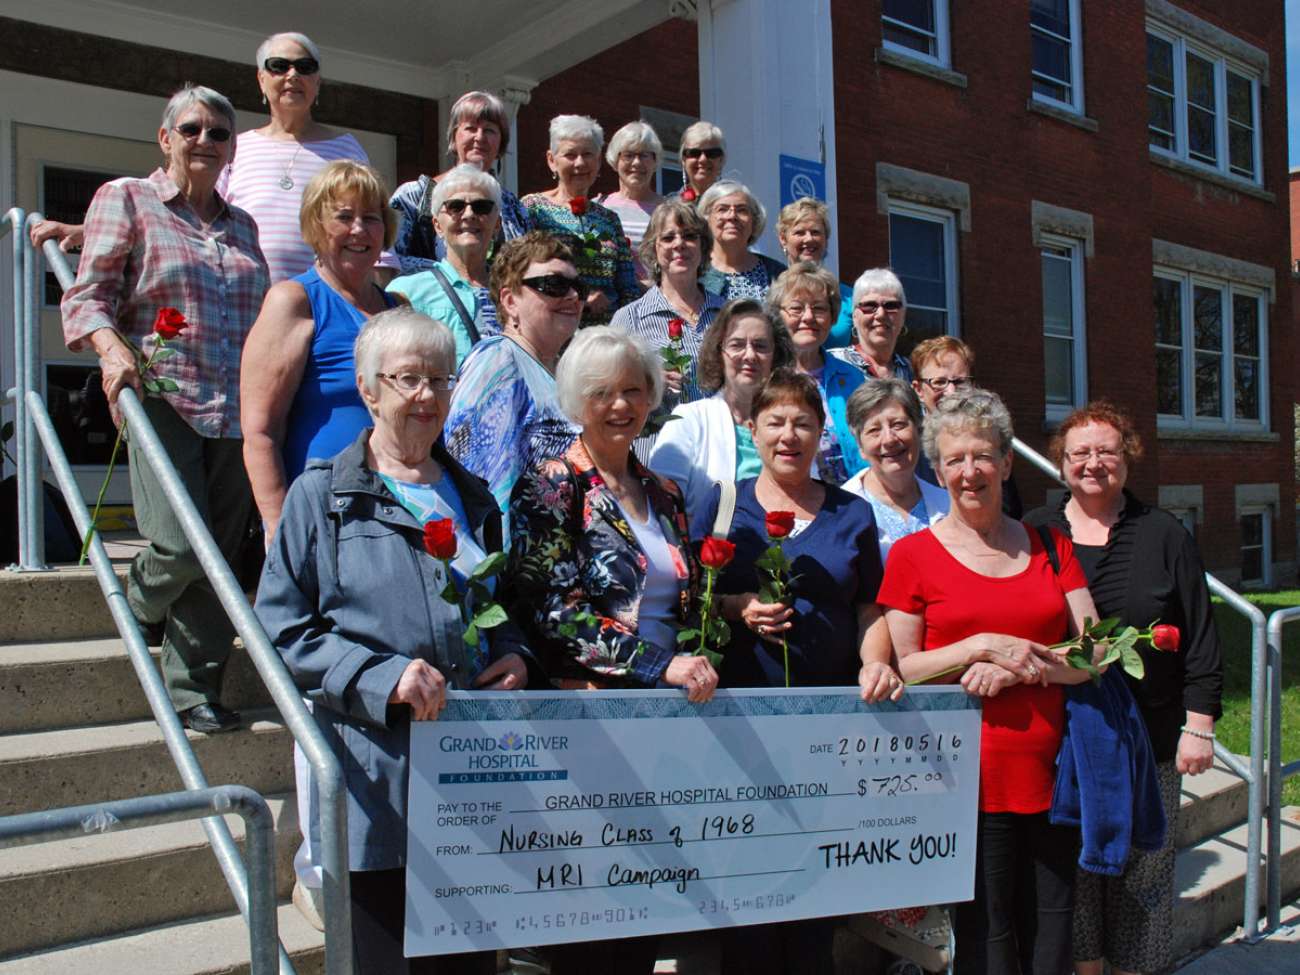 Following their tour, participants donated $725 to the GRH Foundation campaign to replace the hospital's magnetic resonance imaging scanner.